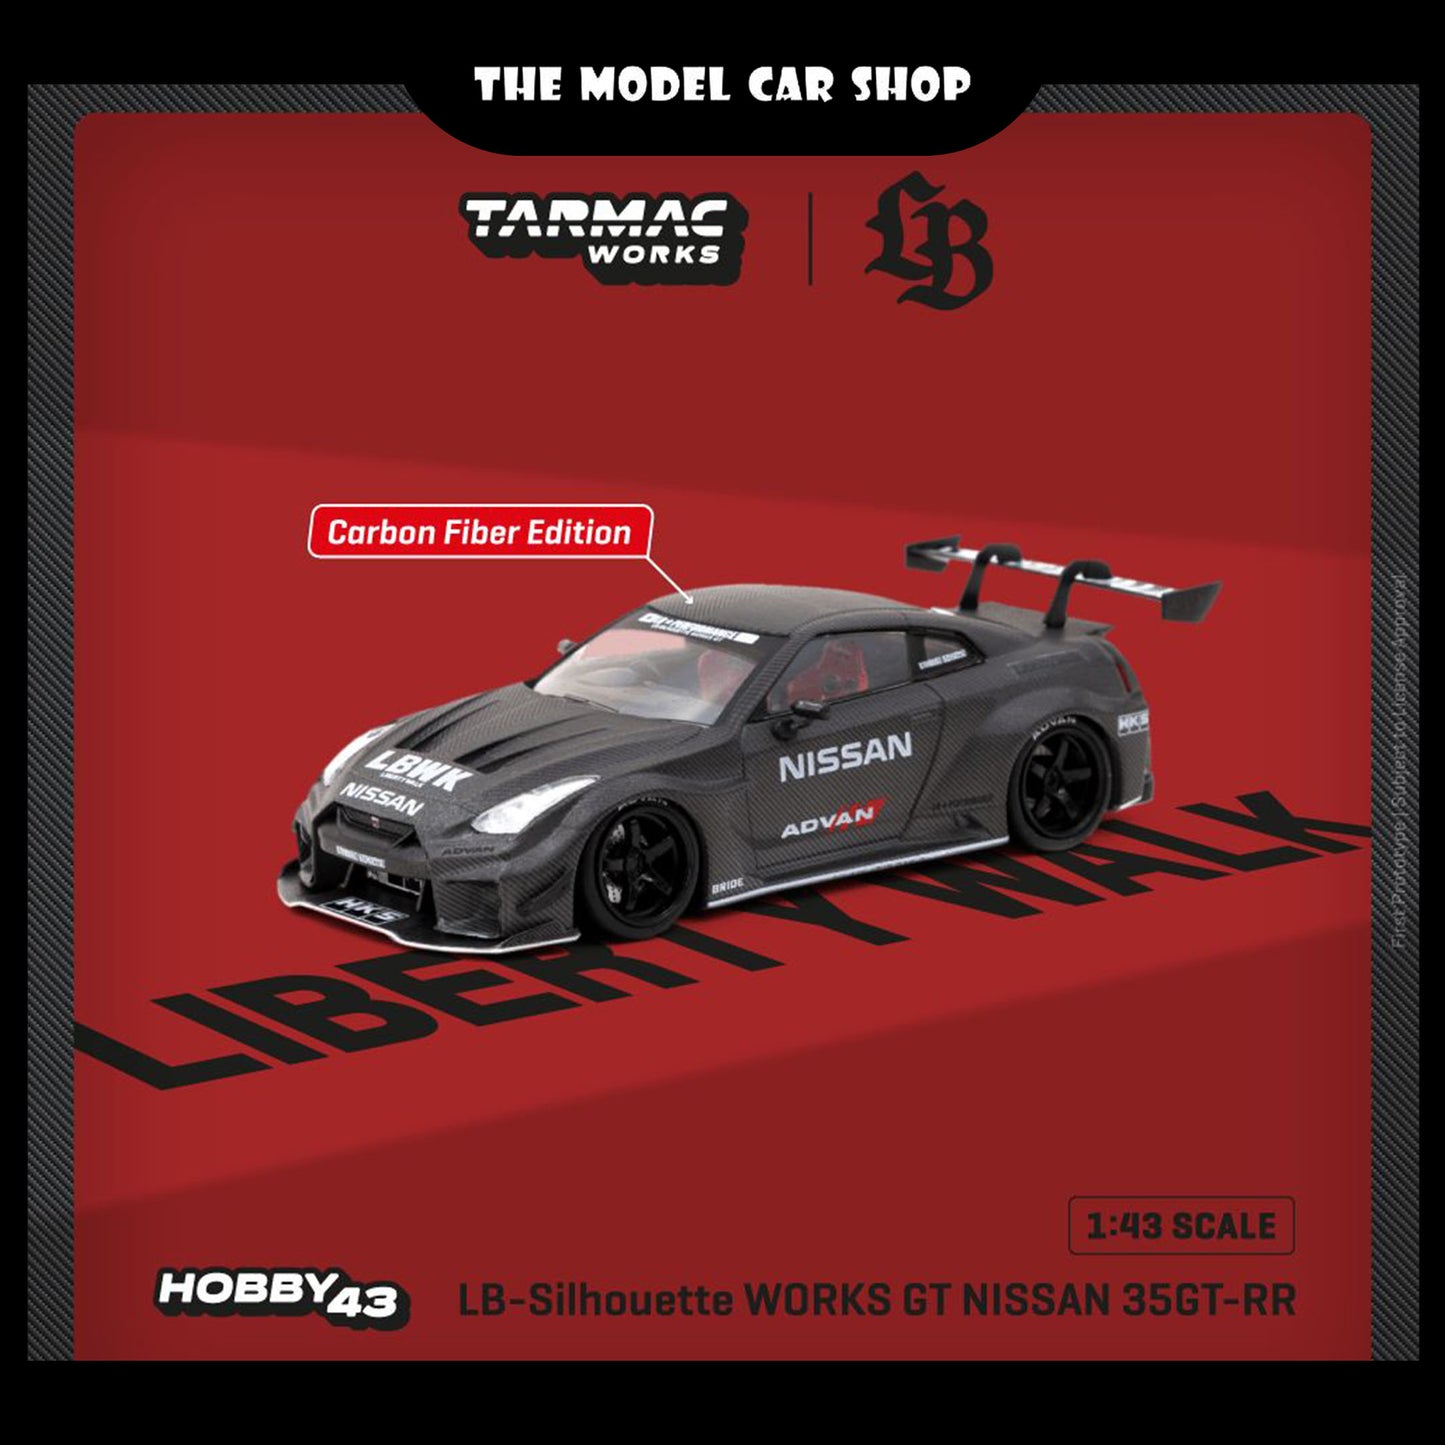 [Tarmac Works] LB-Silhouette Works GT Nissan 35GT-RR Full Carbon